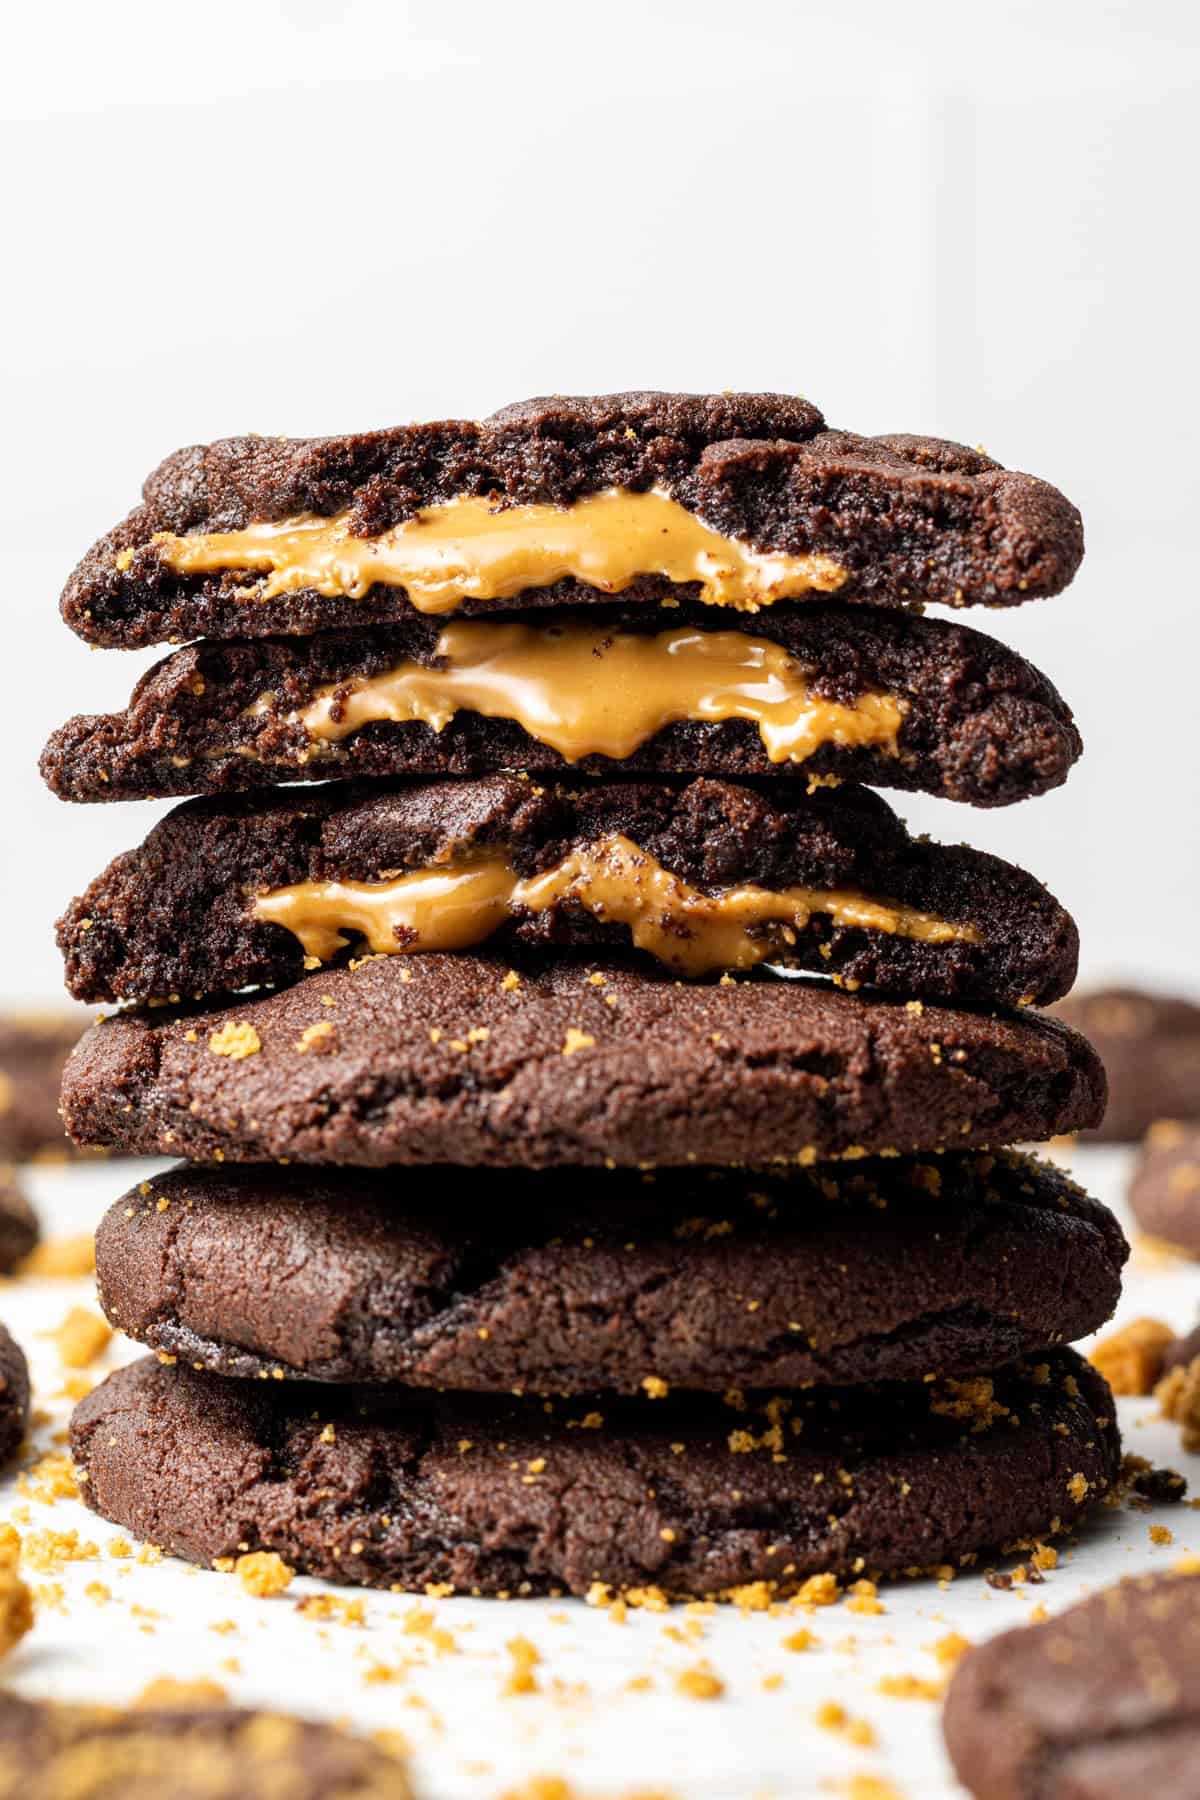 Stacked chocolate cookies with gooey centers.